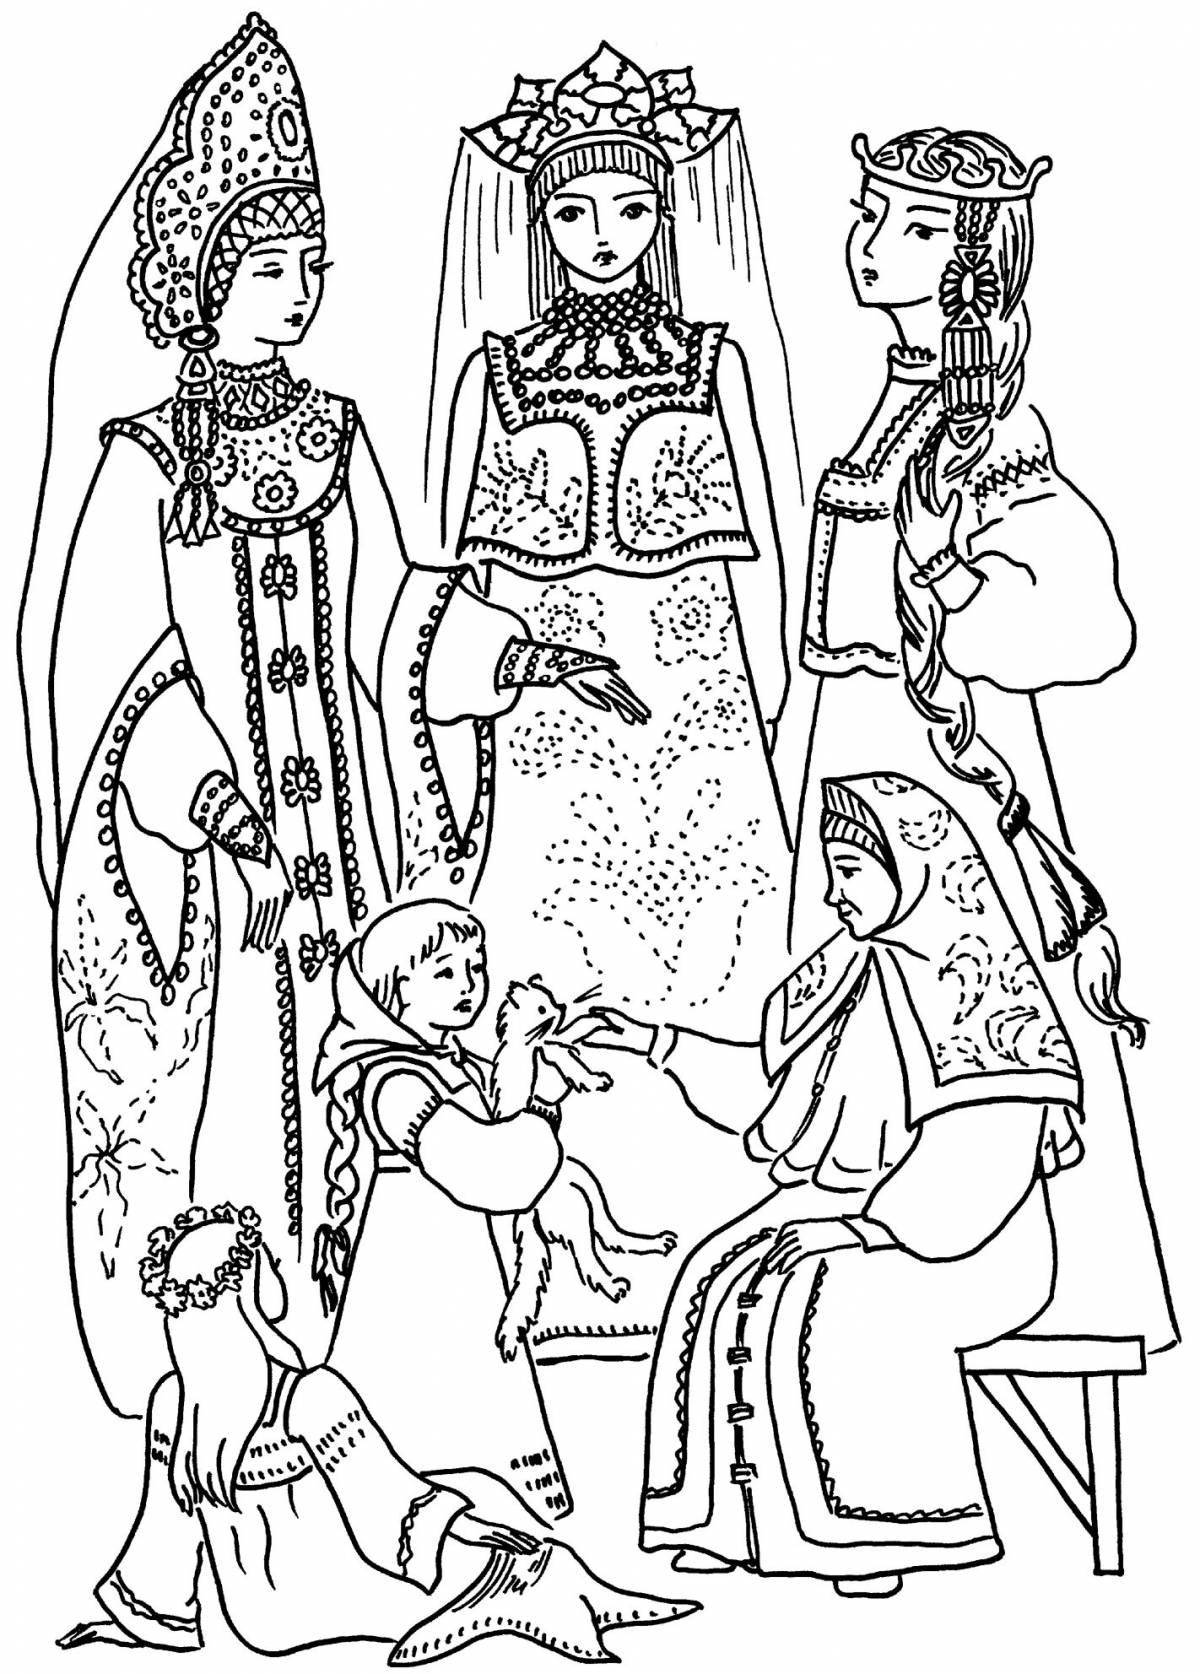 Great folk costume coloring book for kids